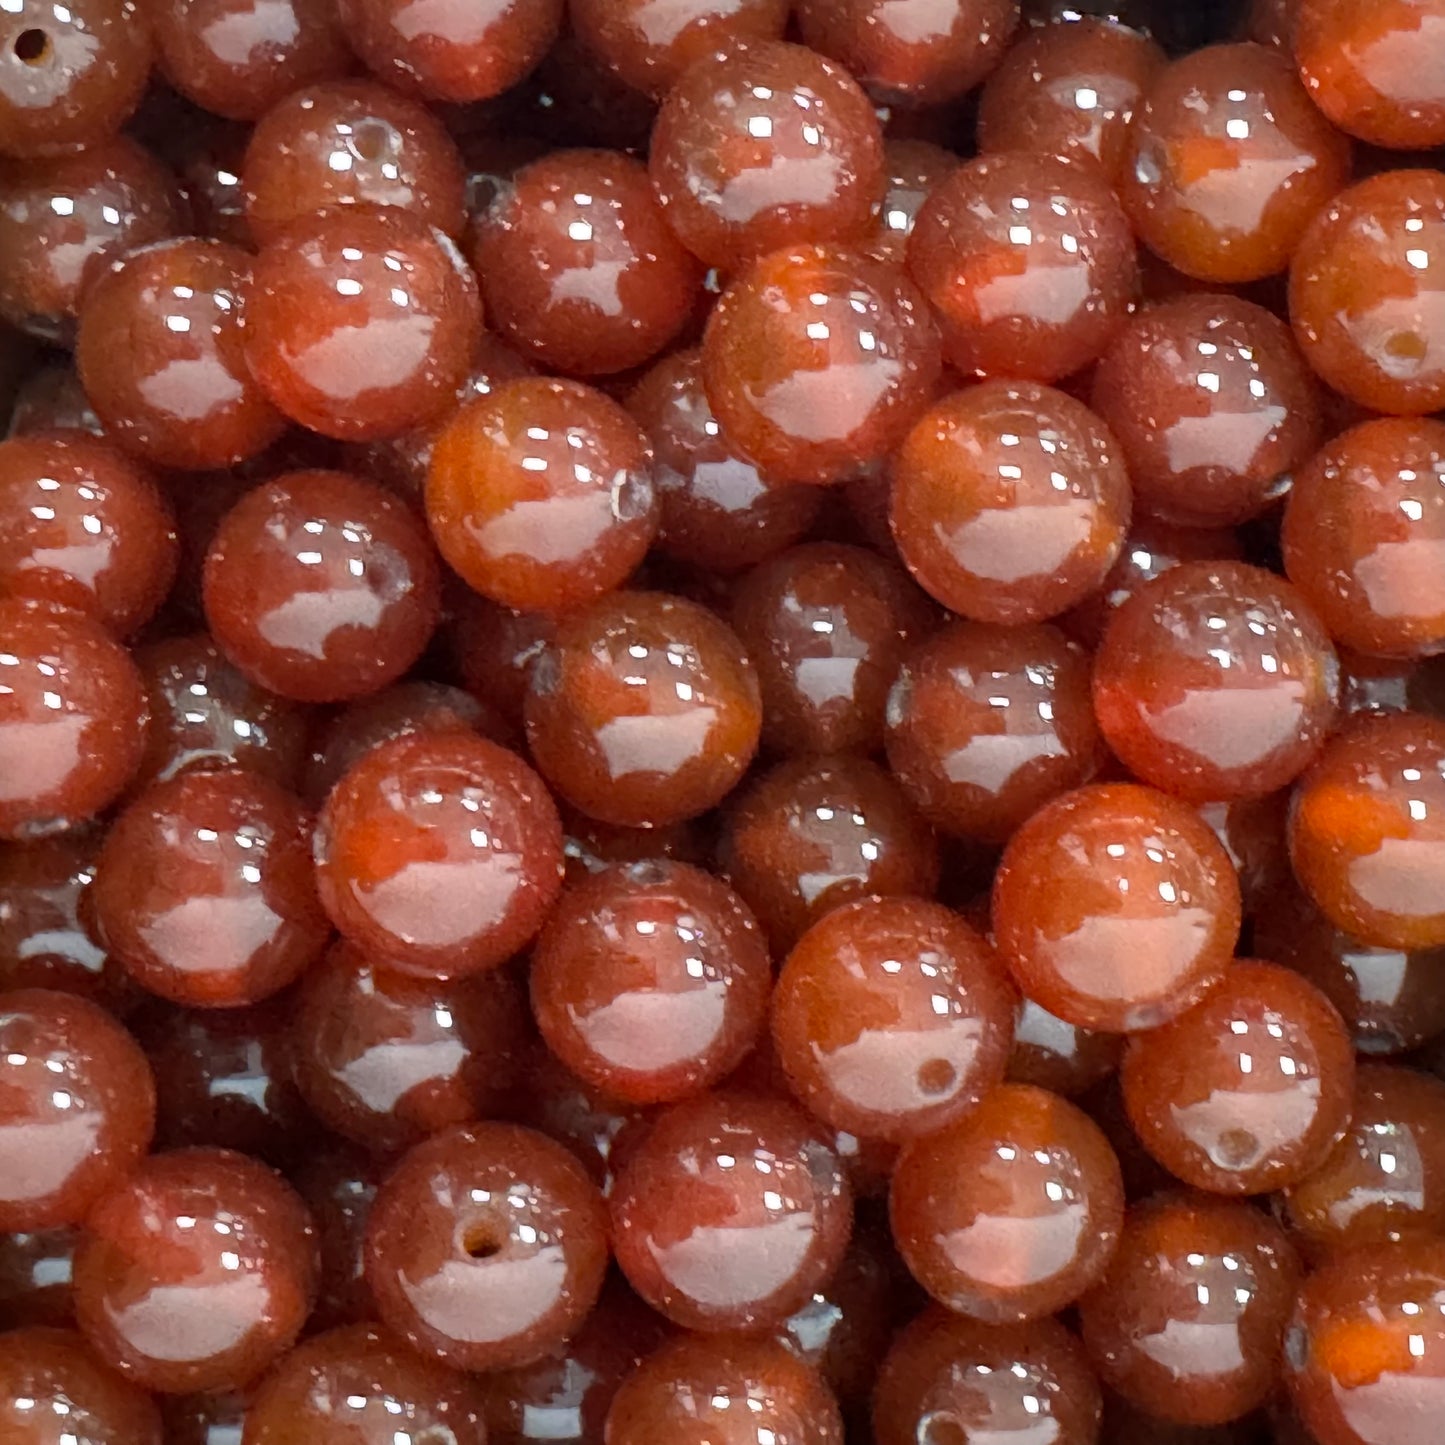 Red agate 10mm round bead 40 pcs with string kit